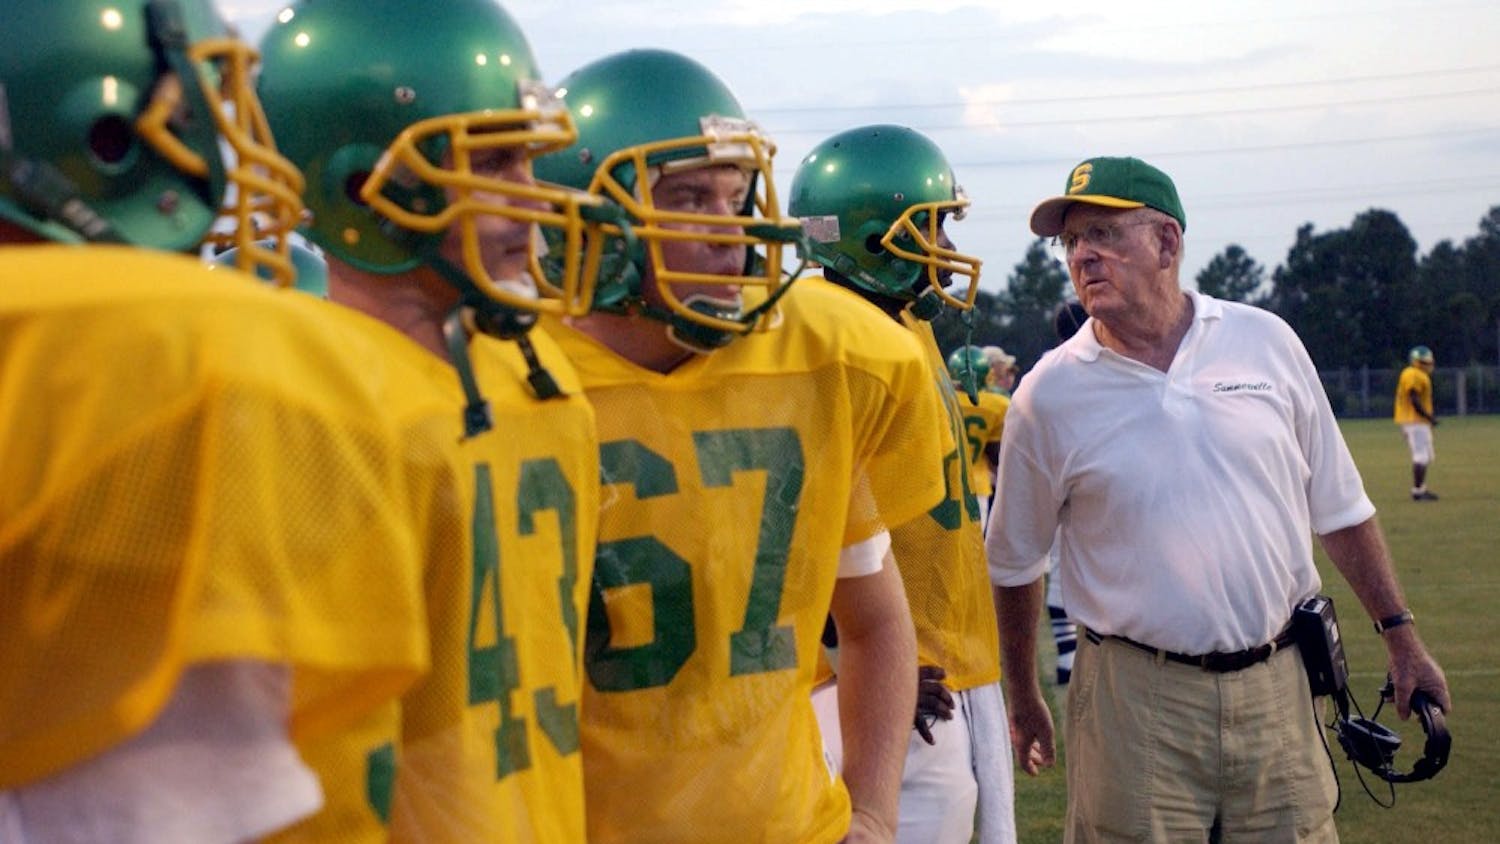 KRT SPORTS STORY SLUGGED: FBH-MCKISSICK KRT PHOTOGRAPH BY TODD BENNETT/THE STATE (September 25) Football coach John McKissick with his players at Summerville, South Carolina. He is the winningest coach in the nation's history. (mvw) 2003